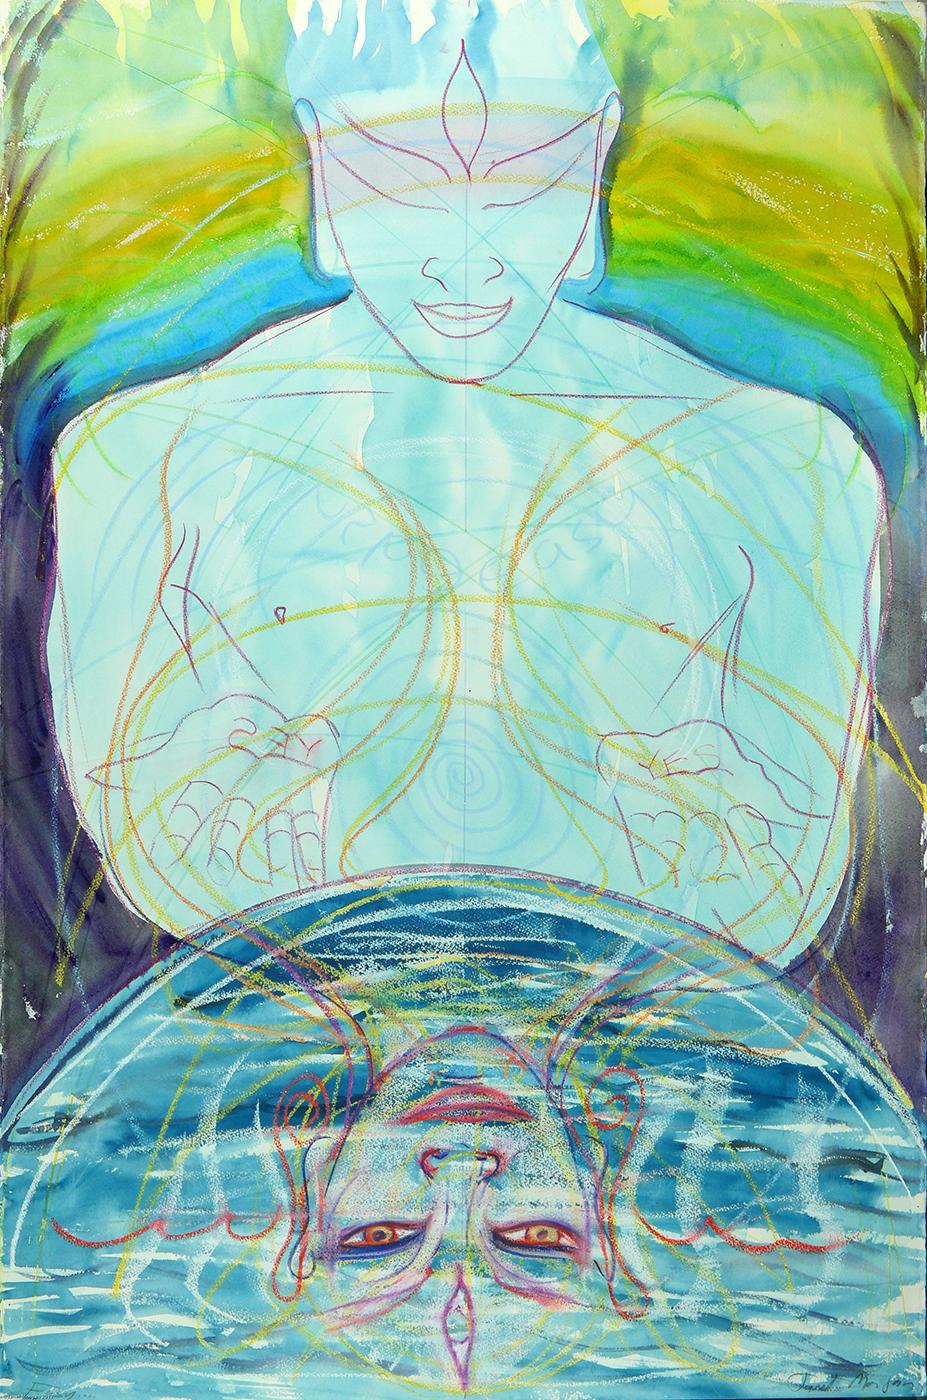 Janet Morgan Nude - Easy, godlike figure, water, reflection, mystical images, blues, greens